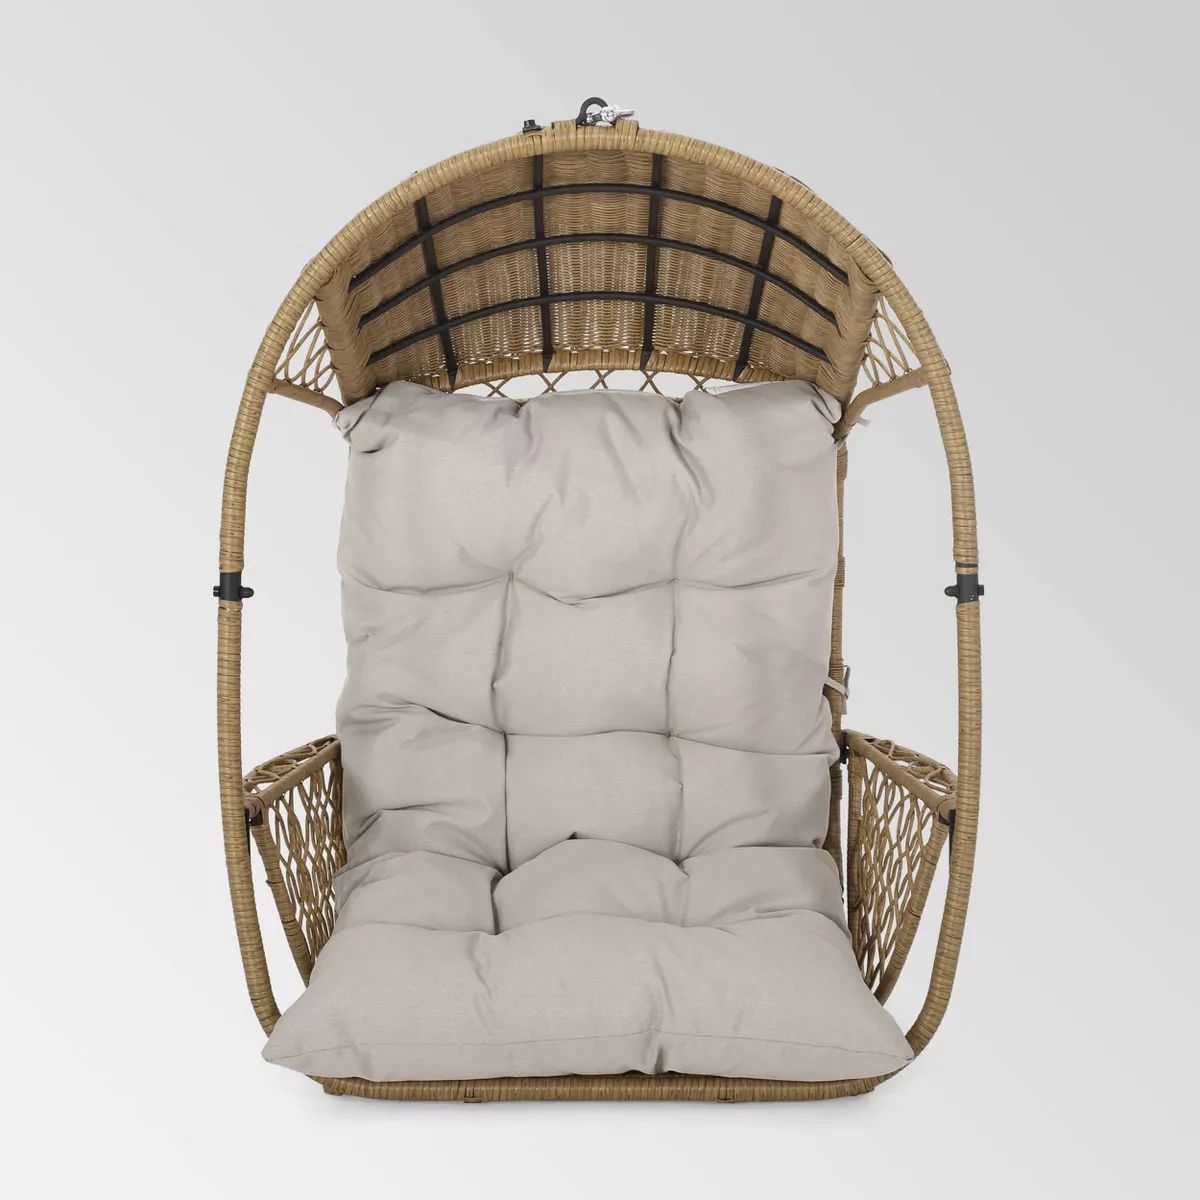 Malia Outdoor Wicker Hanging Chair (Stand Not Included)  Brown/Beige - Christopher Knight Home | Target